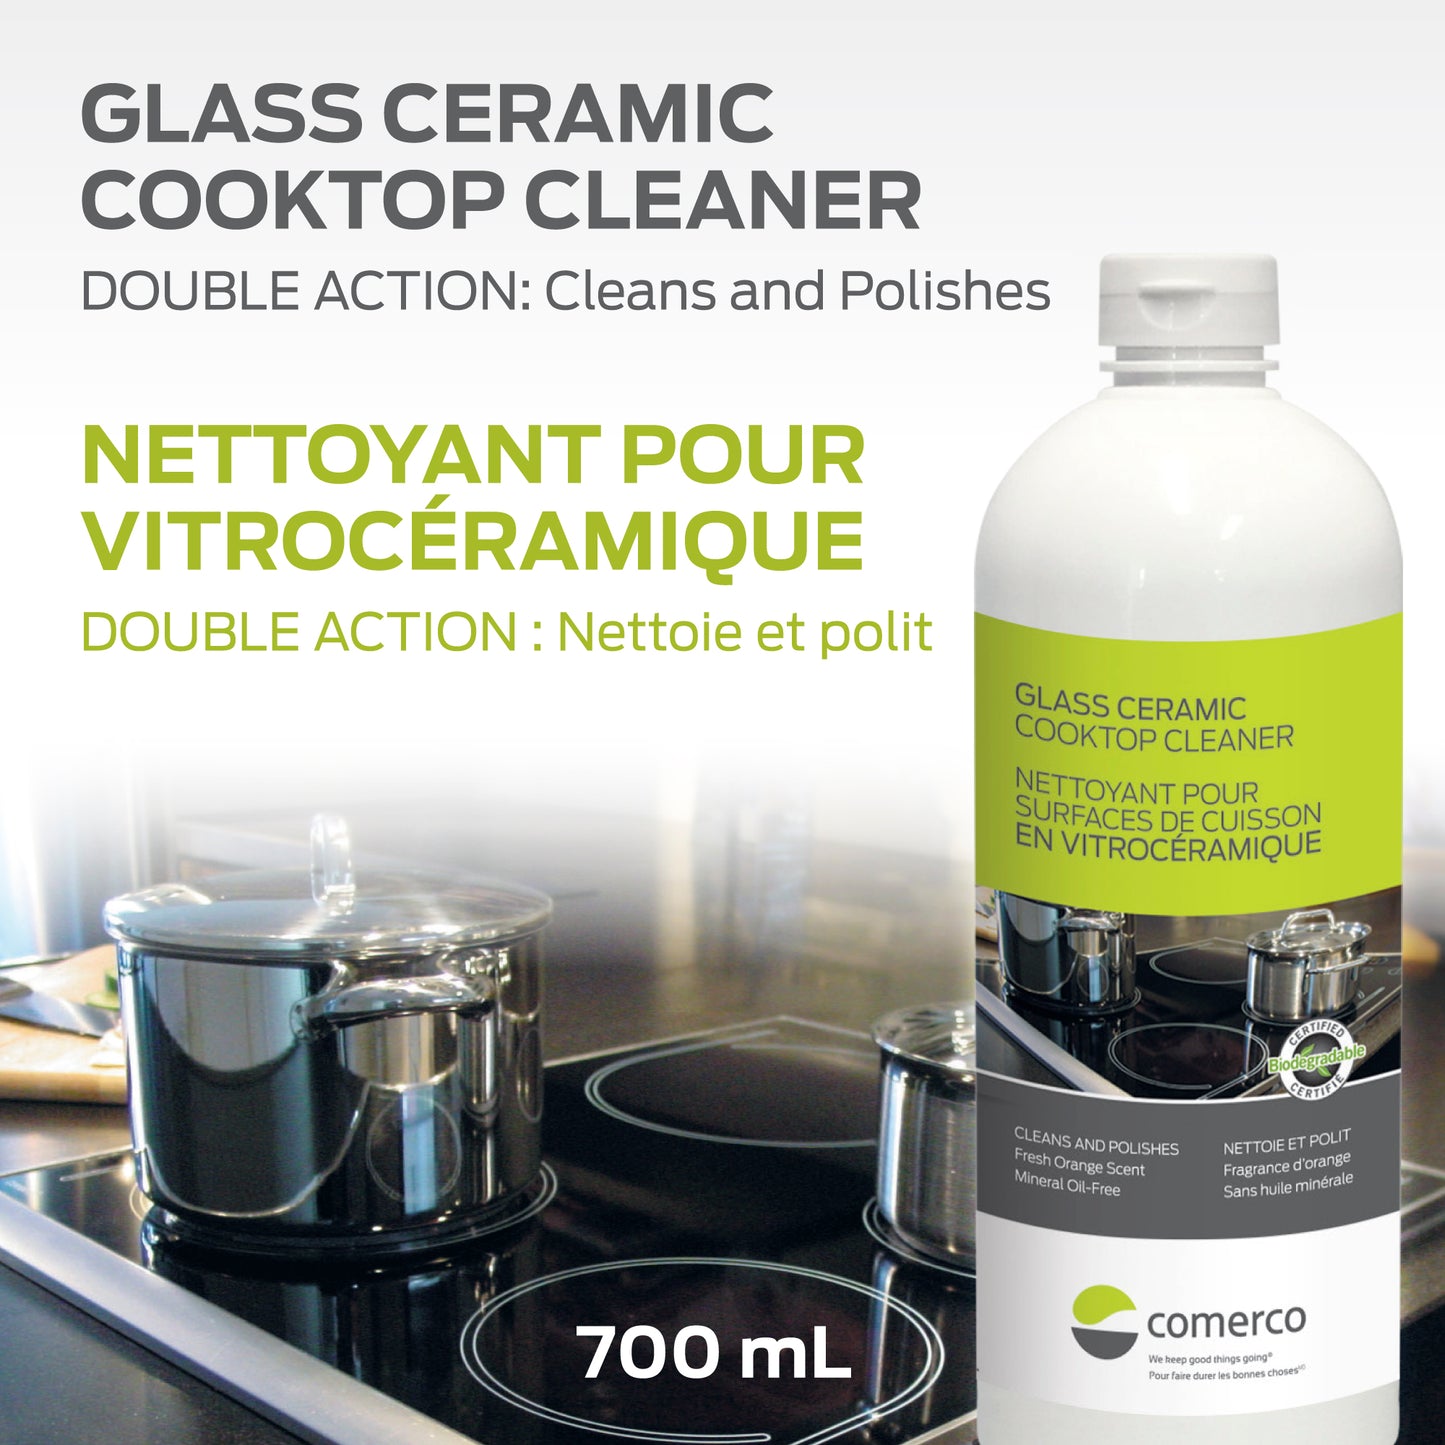 Glass Ceramic Cooktop Cleaning Kit 700 mL
